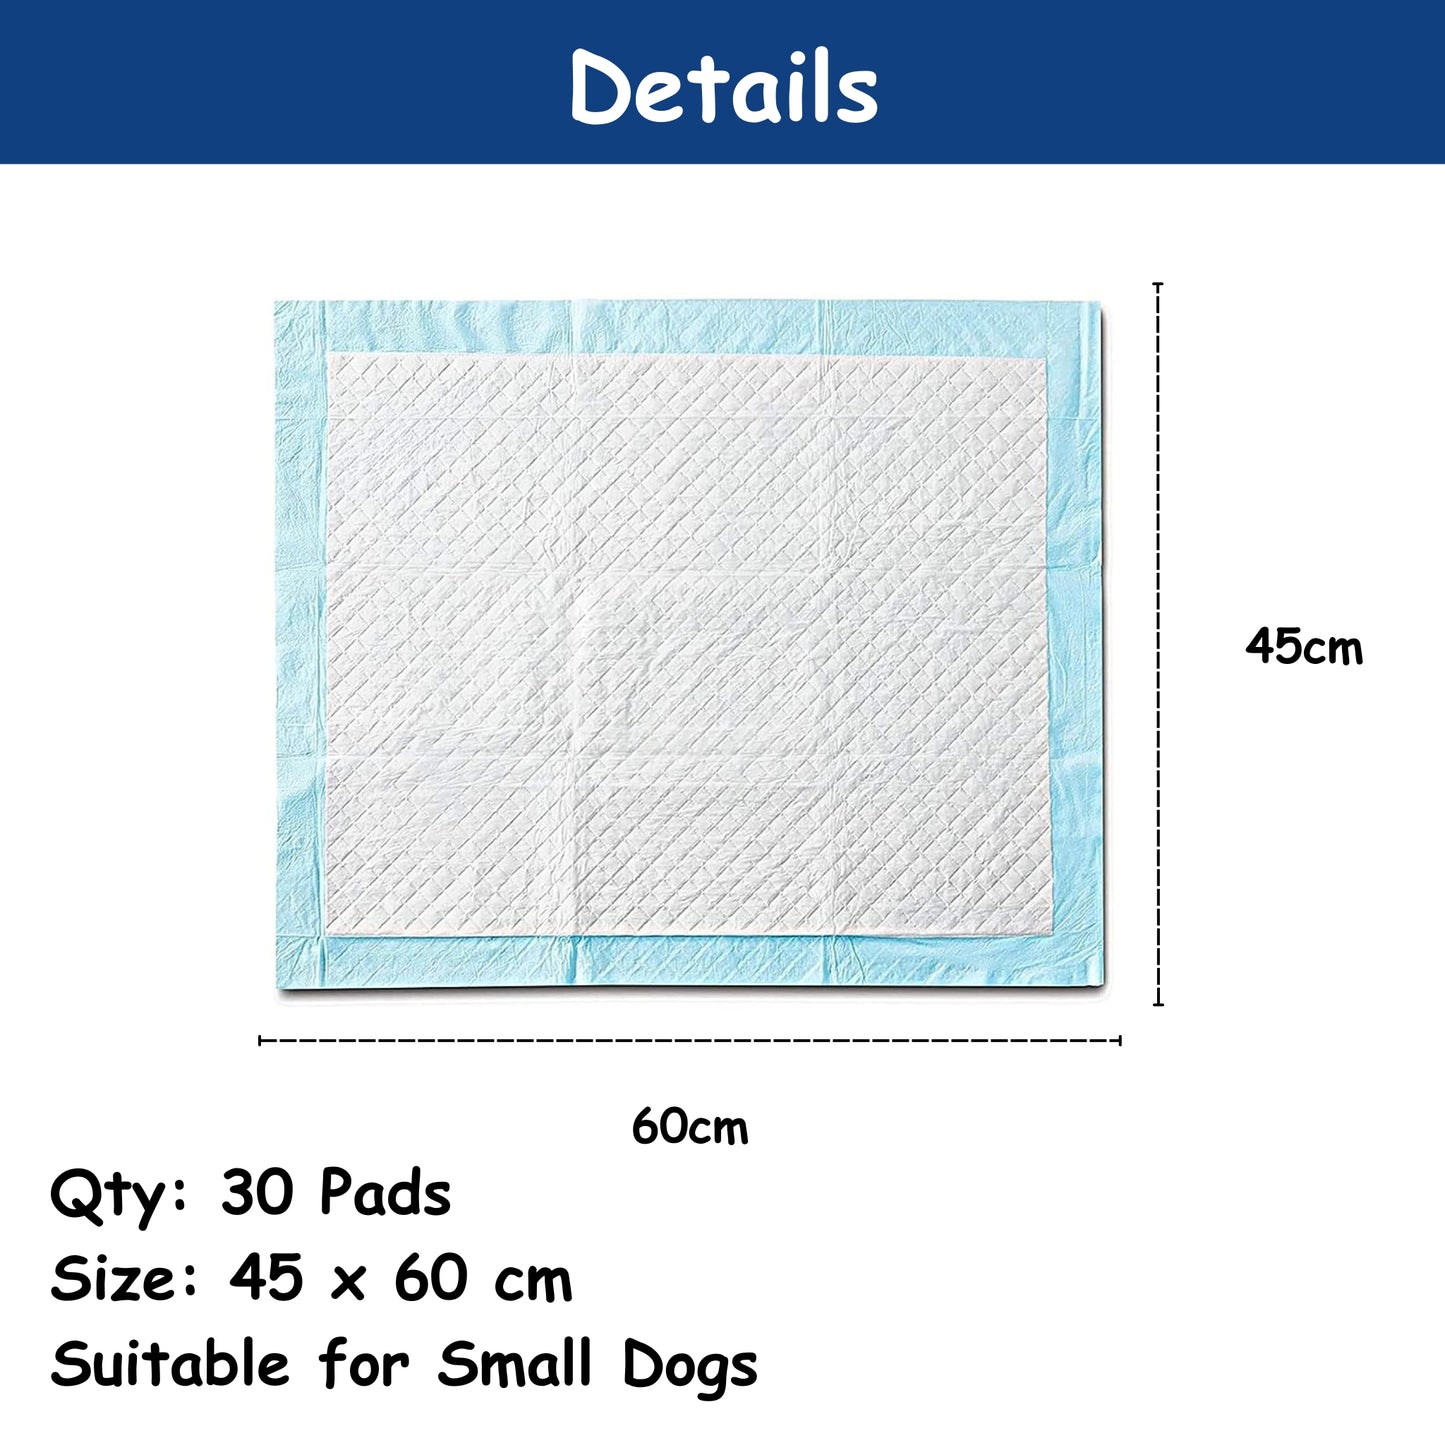 Foodie Puppies Pee/Potty Pet Training Pad - 45x60cm (10 Pads, Pack of 3)